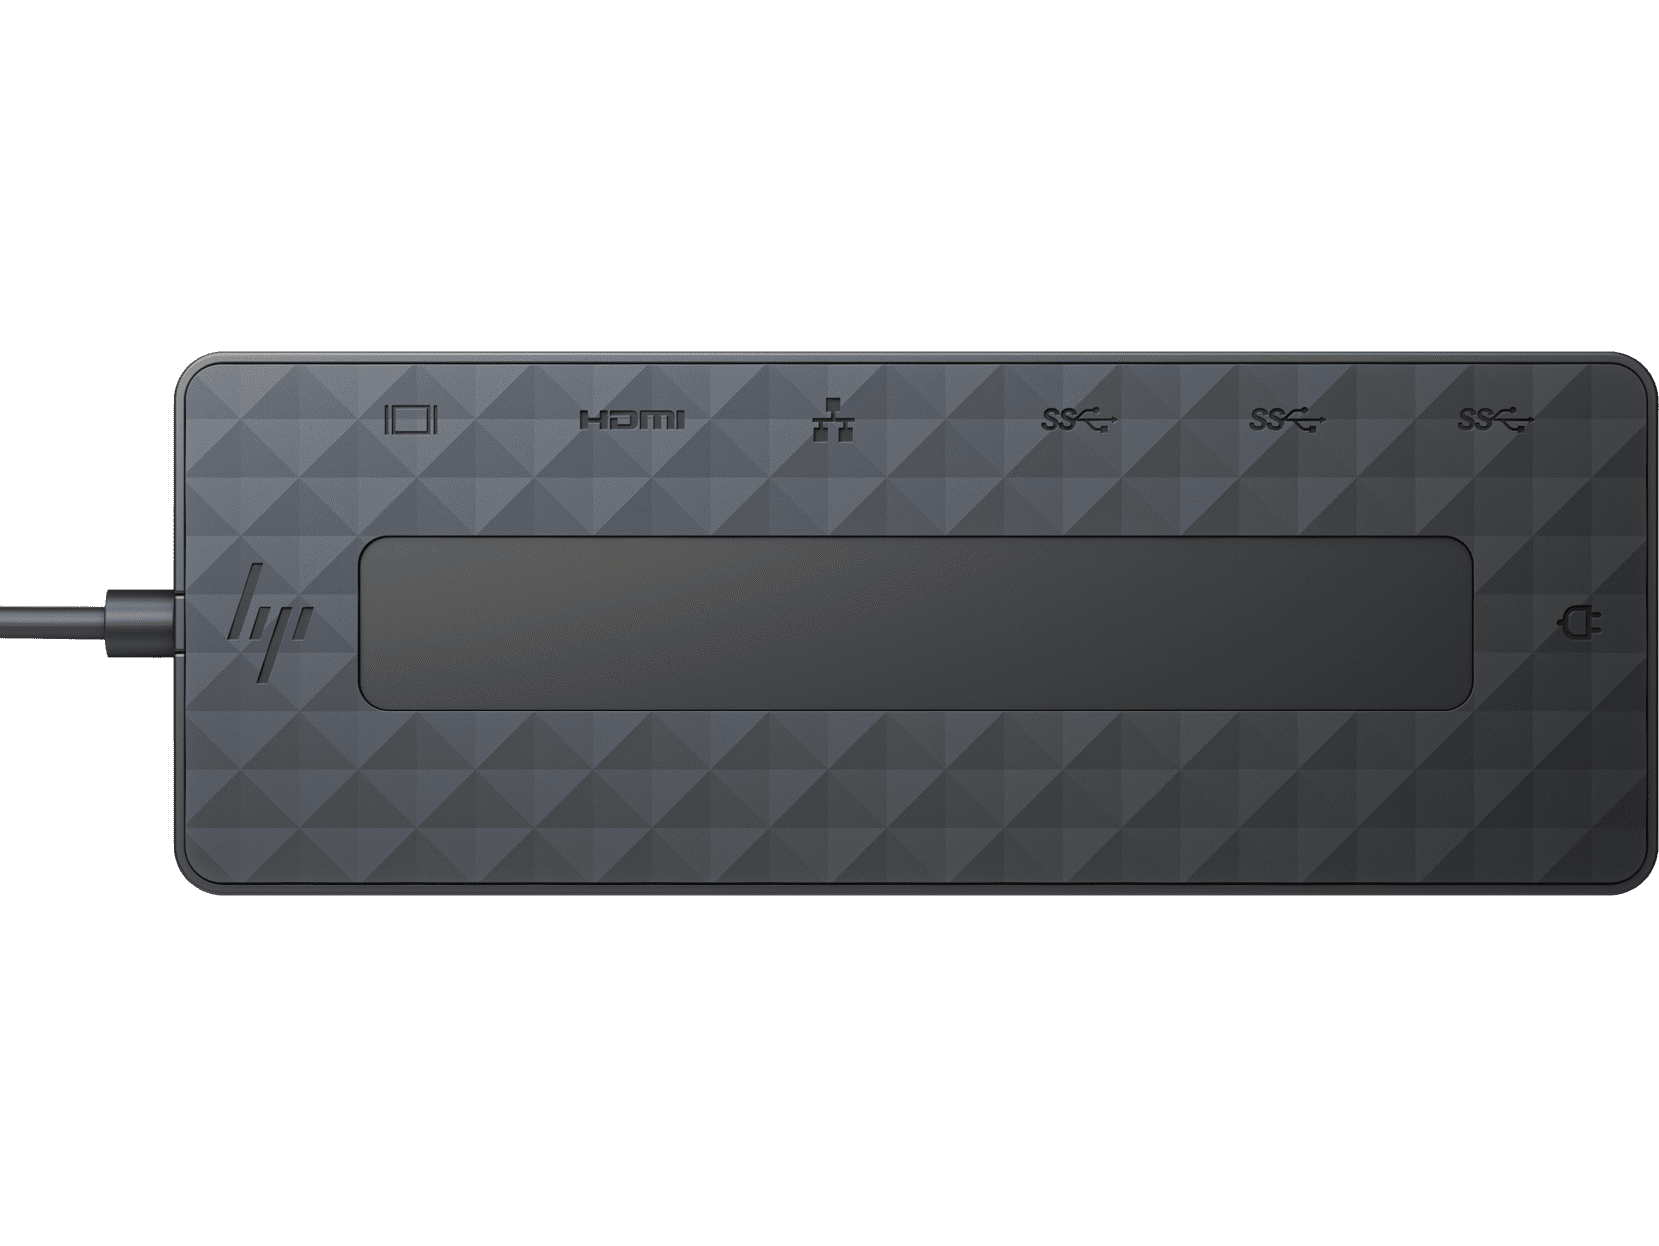 Station d'accueil PC portable Hp Universal USB-C Multiport Hub